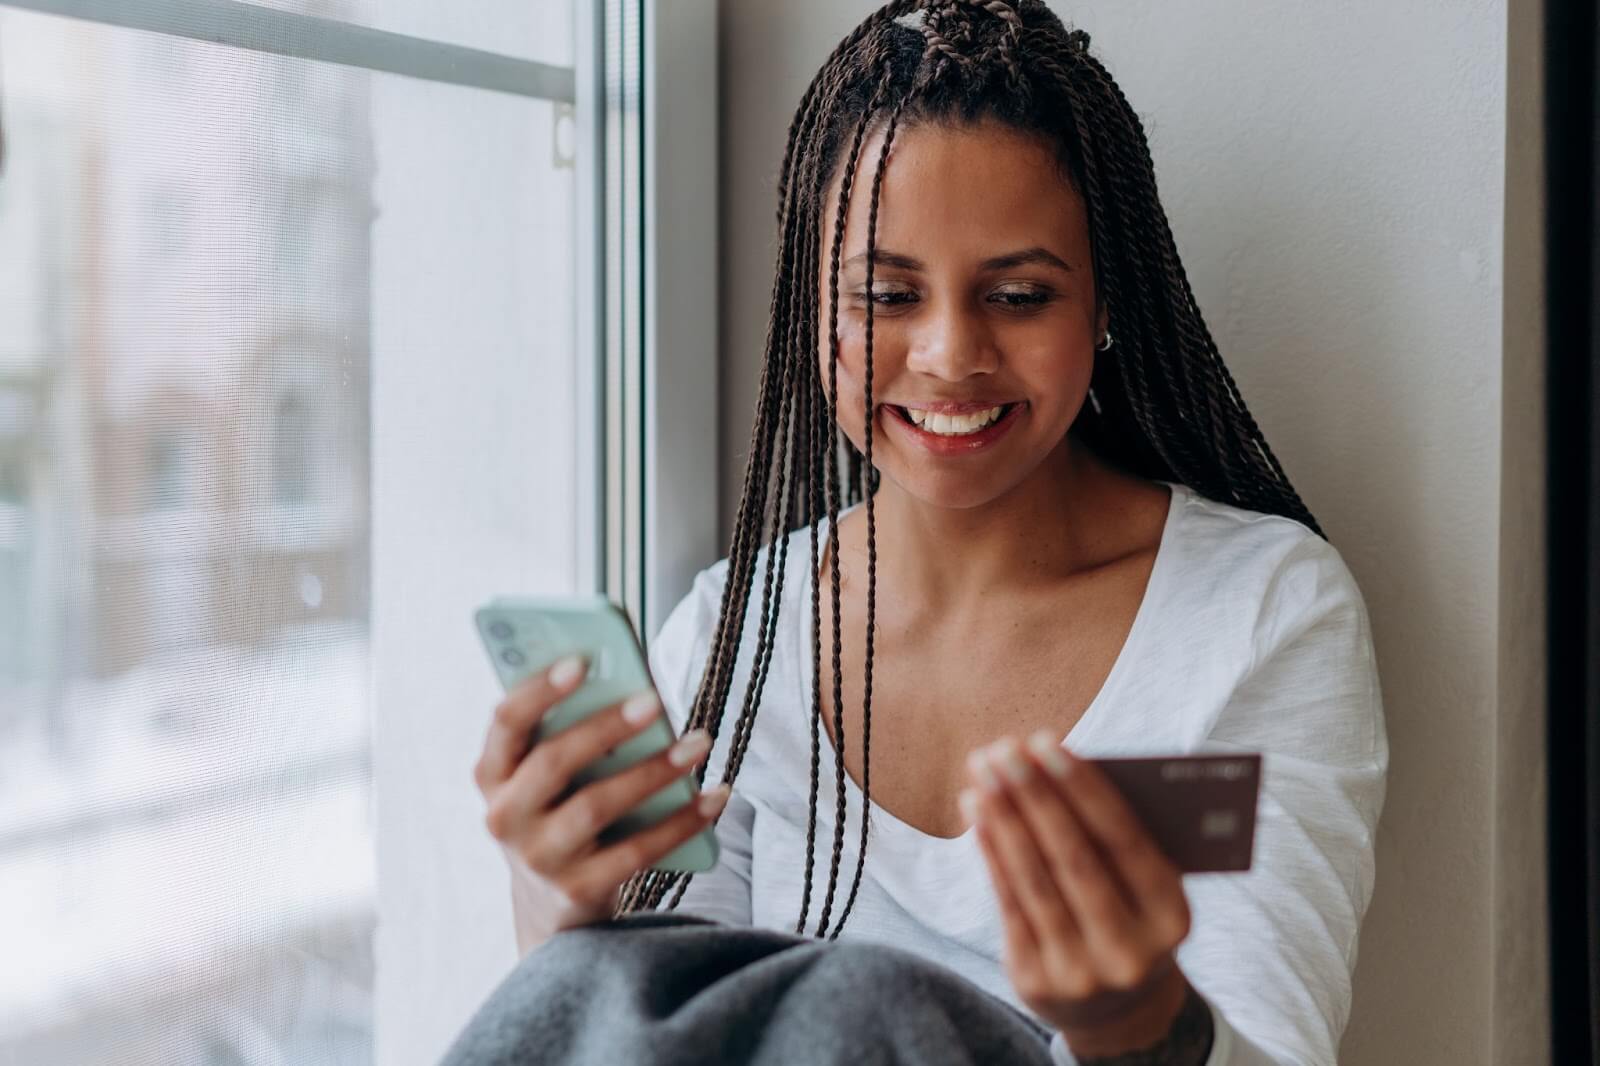 Young woman smiling and sitting on a windowsill, looking at her credit card and holding a smartphone in her other hand